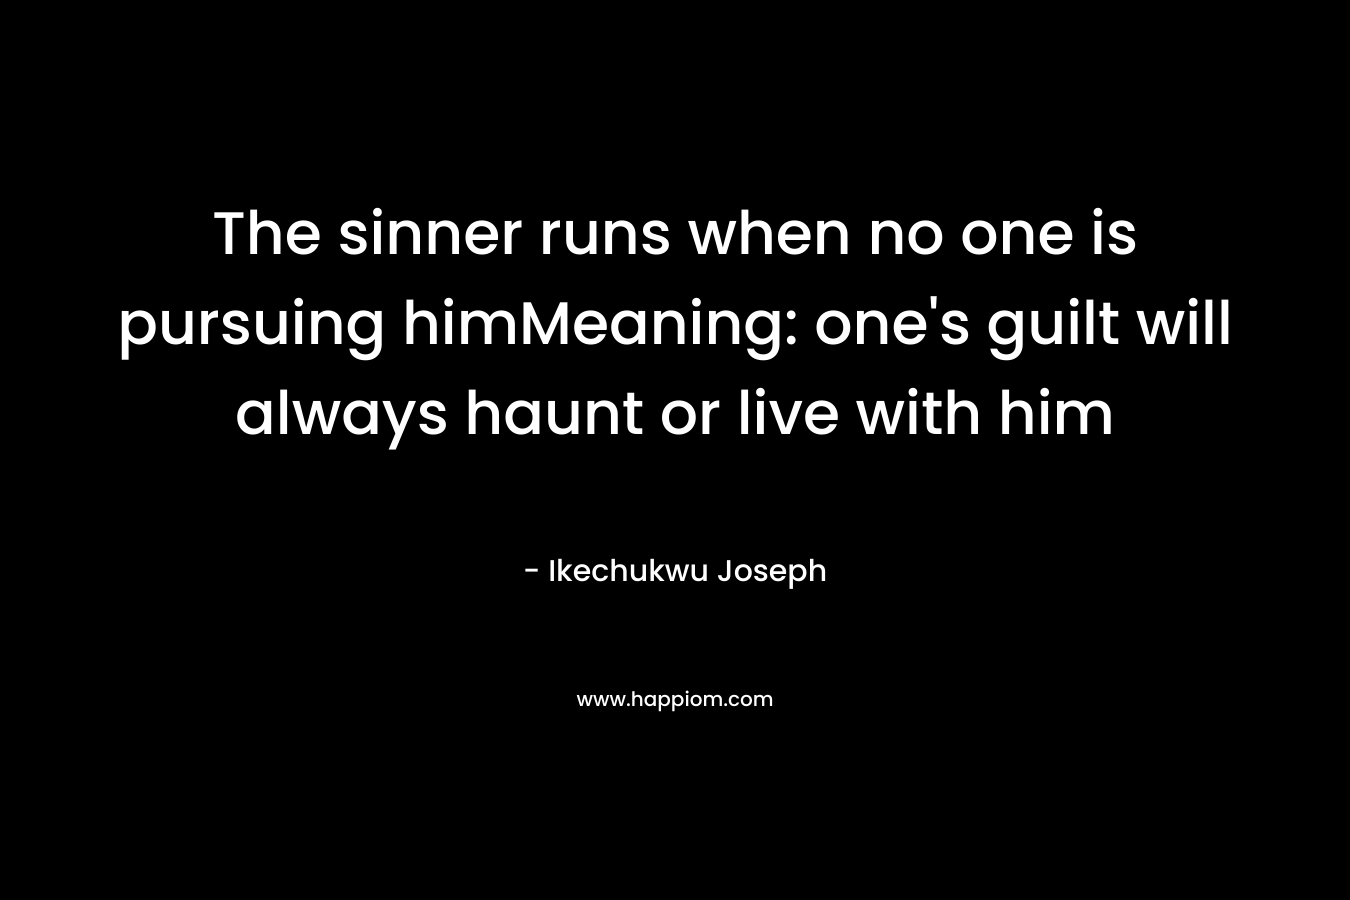 The sinner runs when no one is pursuing himMeaning: one's guilt will always haunt or live with him